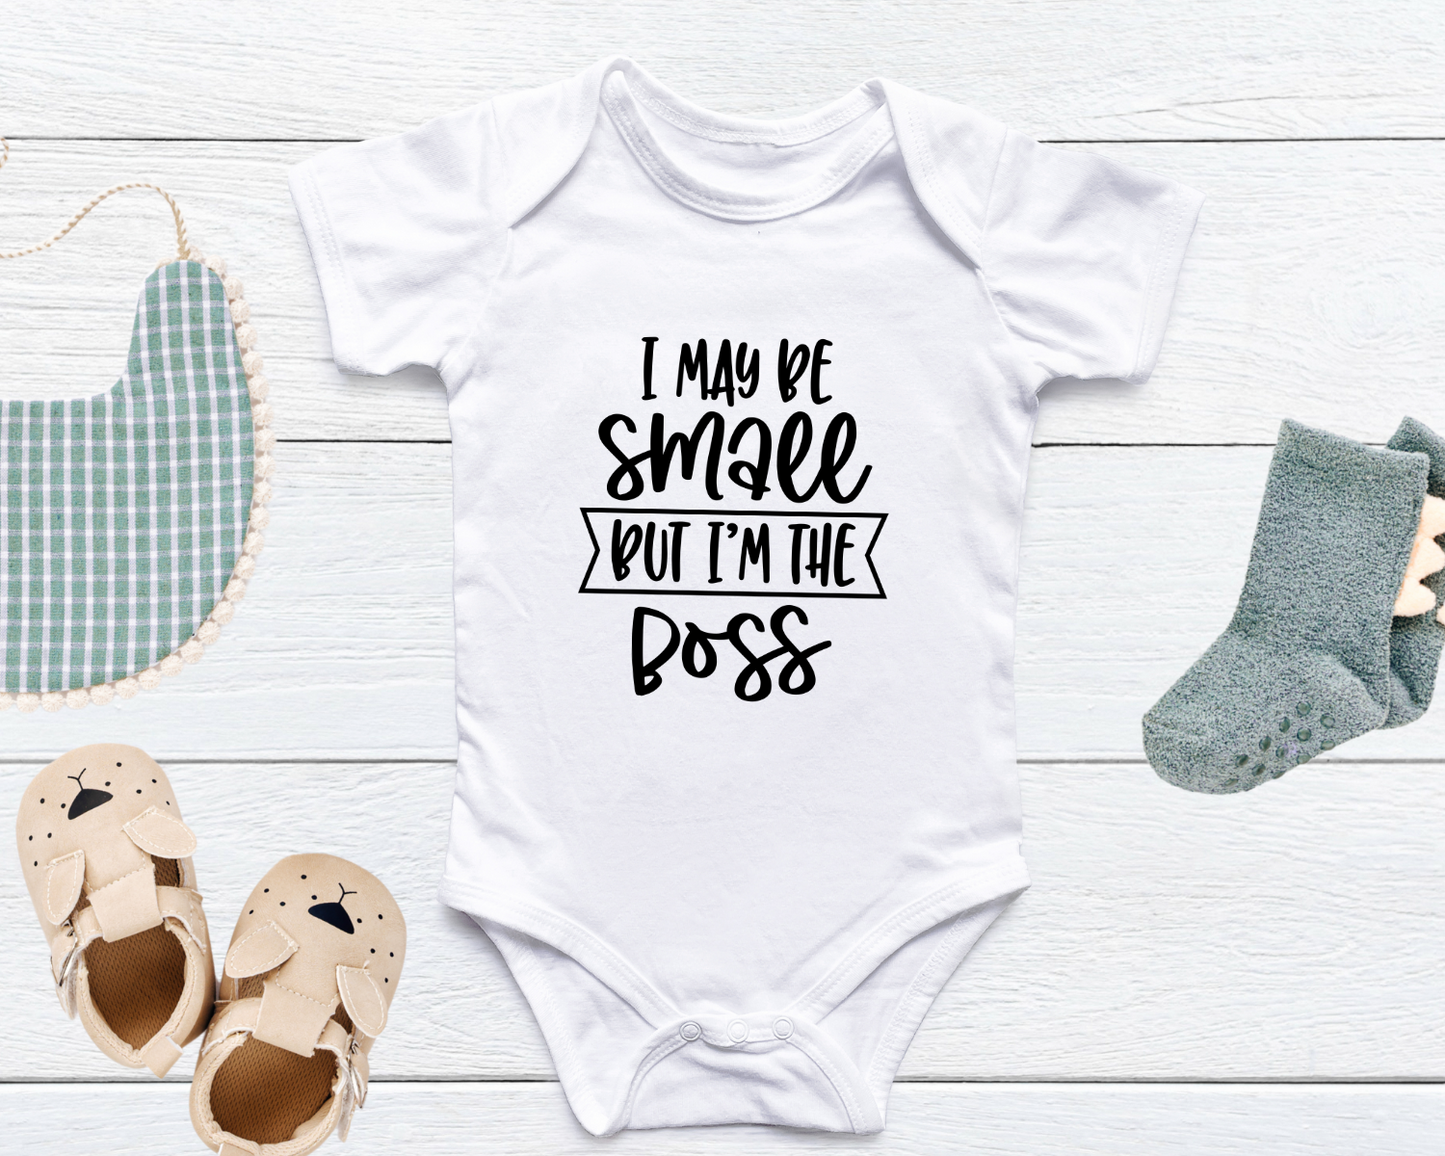 I May Be Small, But I'm the Boss | Funny Baby Onesie® Bodysuit minimunchkinclothingco